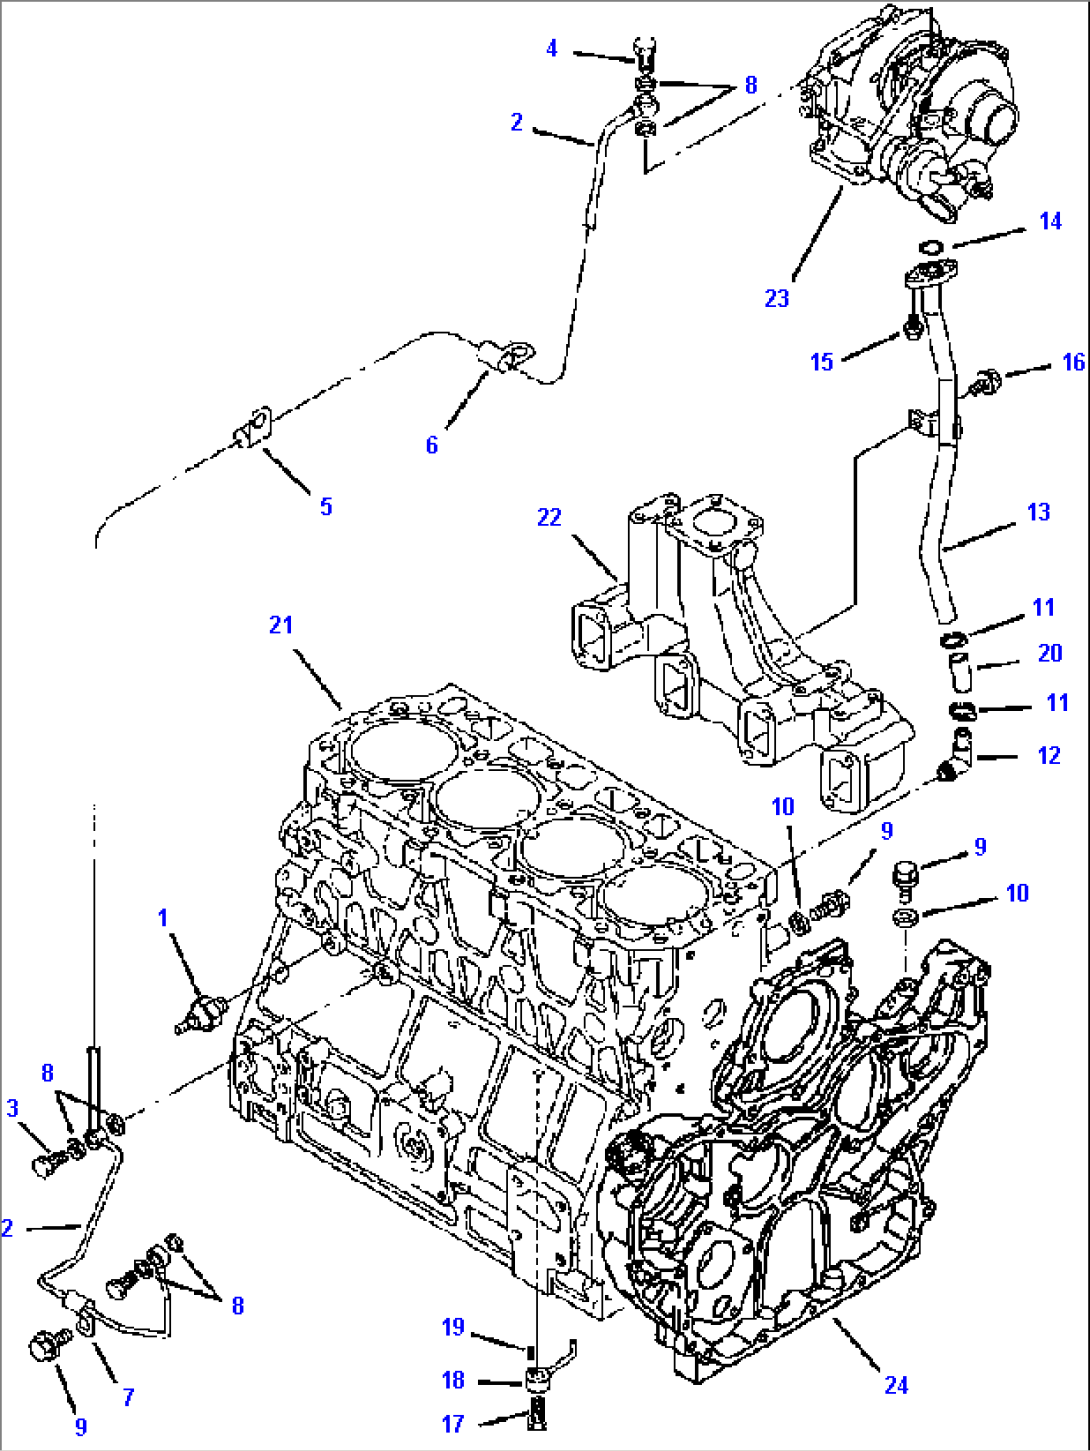 FIG. A0121-01A0 ENGINE - TURBO LUBE LINES